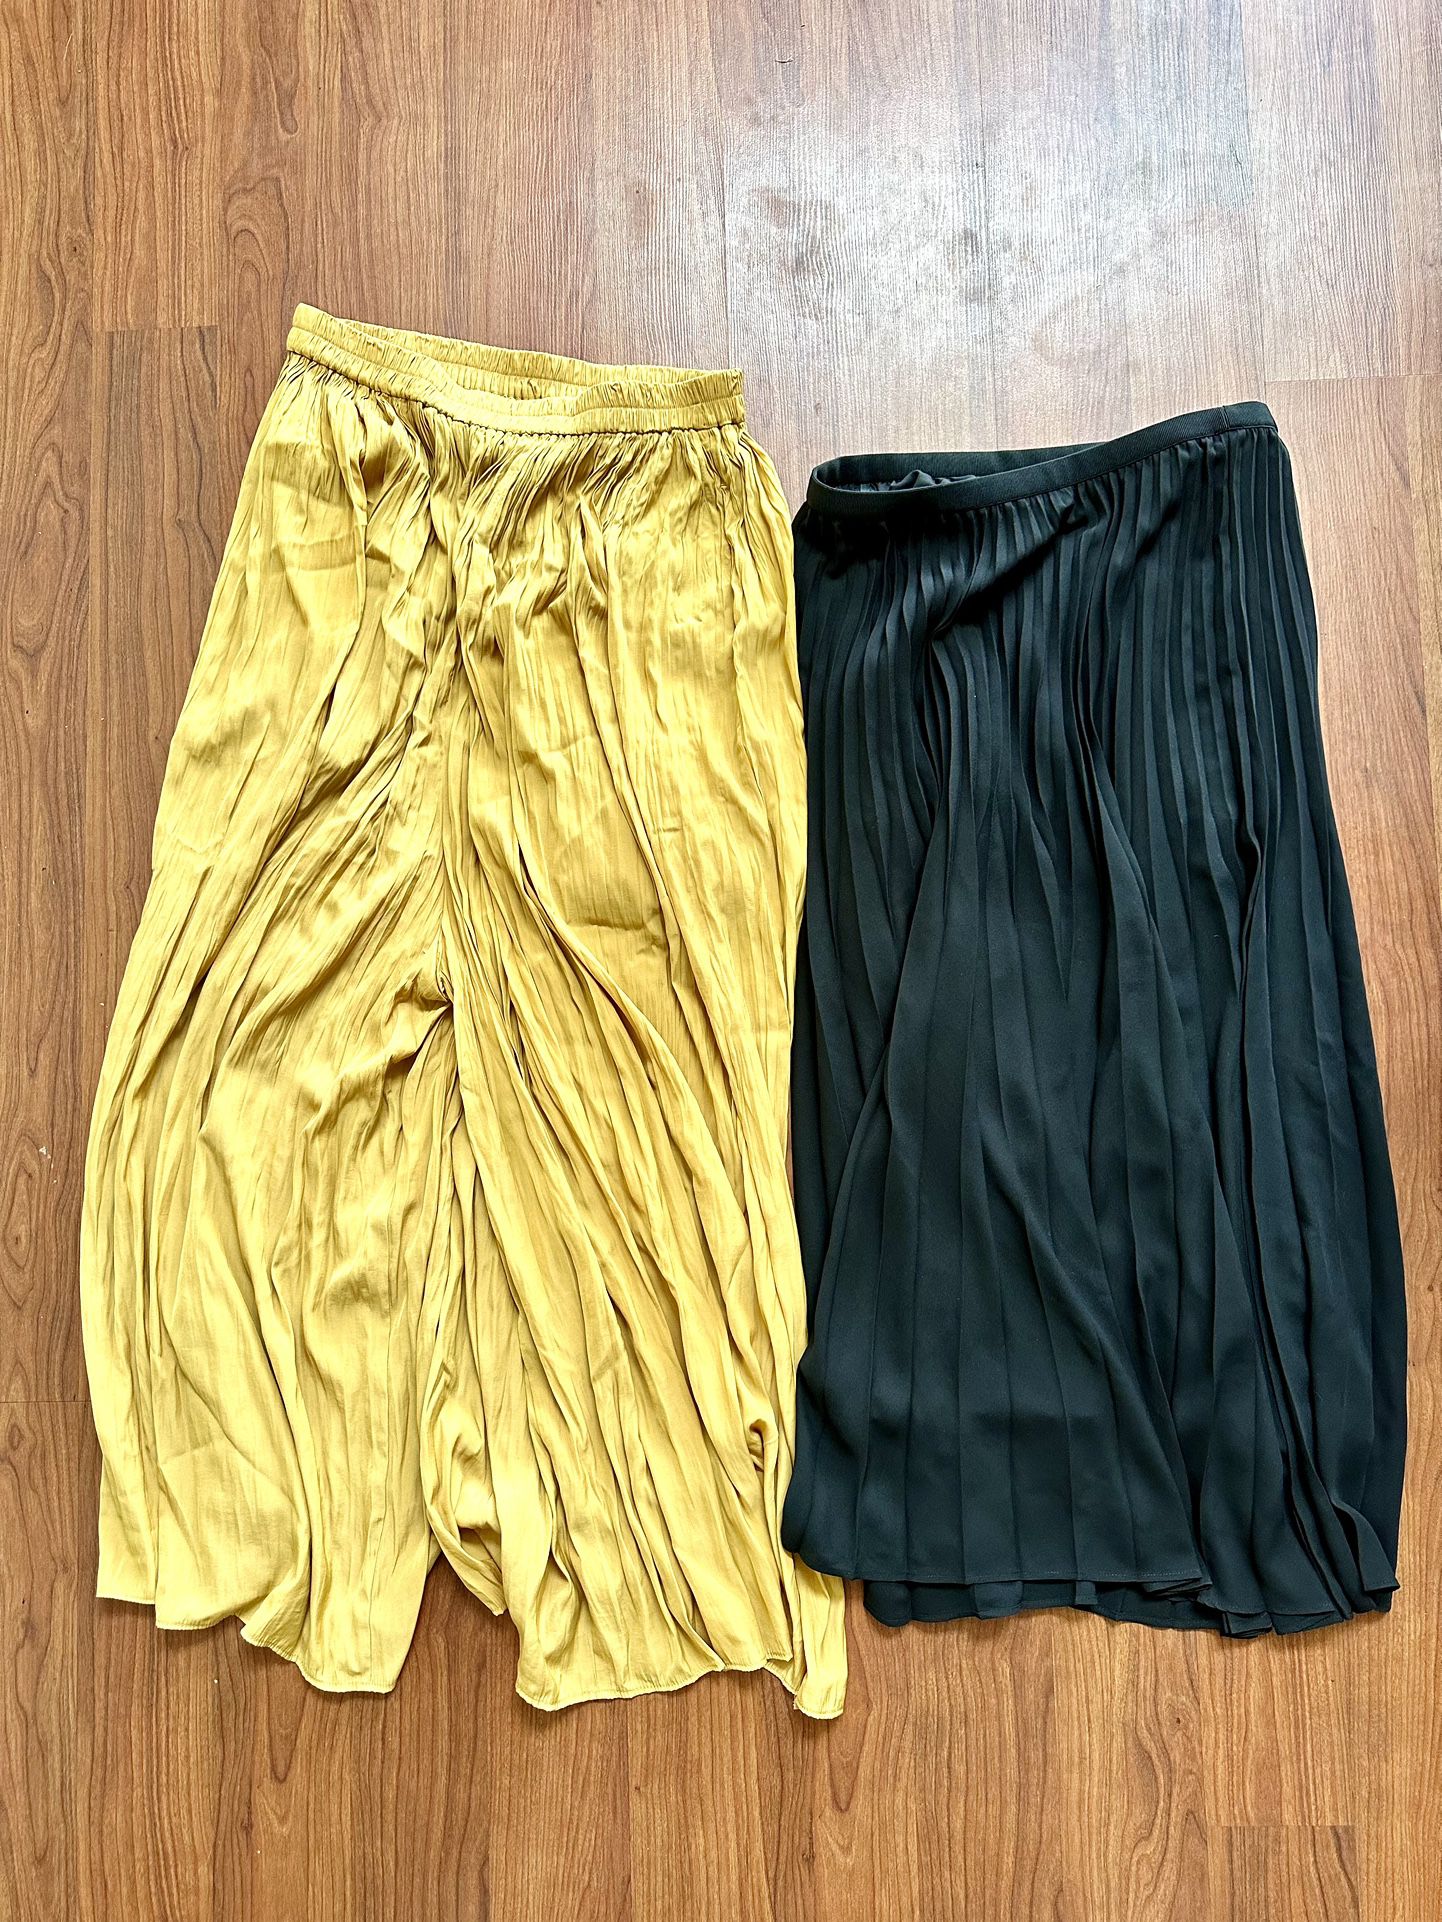 Uniqlo Pleated Black Skirt And Wide Pants Never Worn